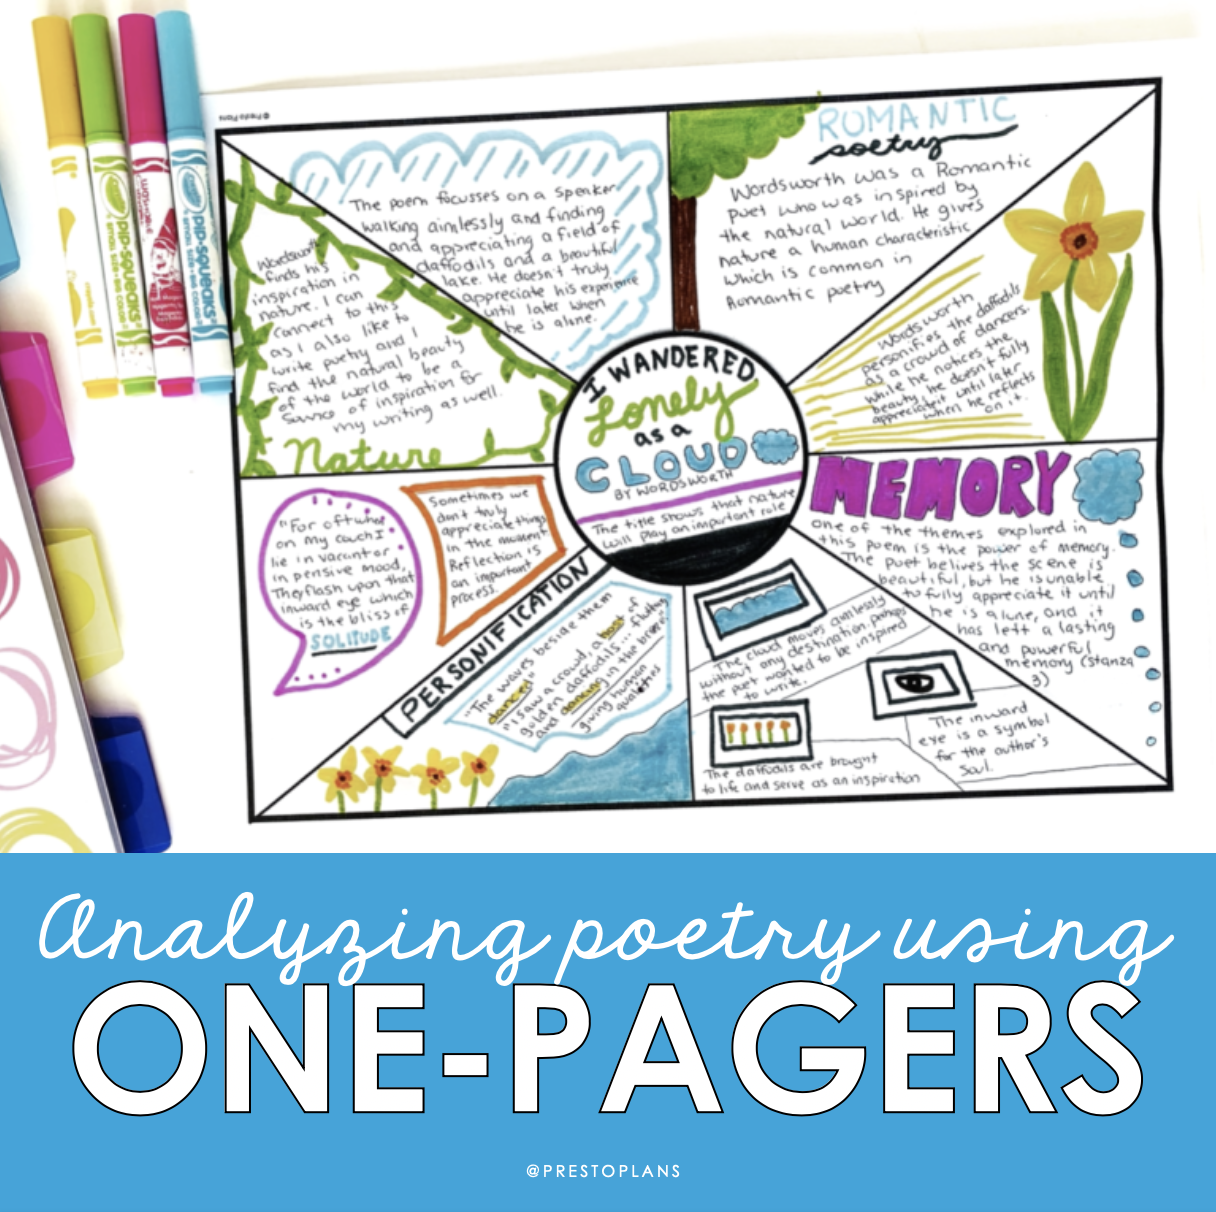 Analyzing poetry using one pagers